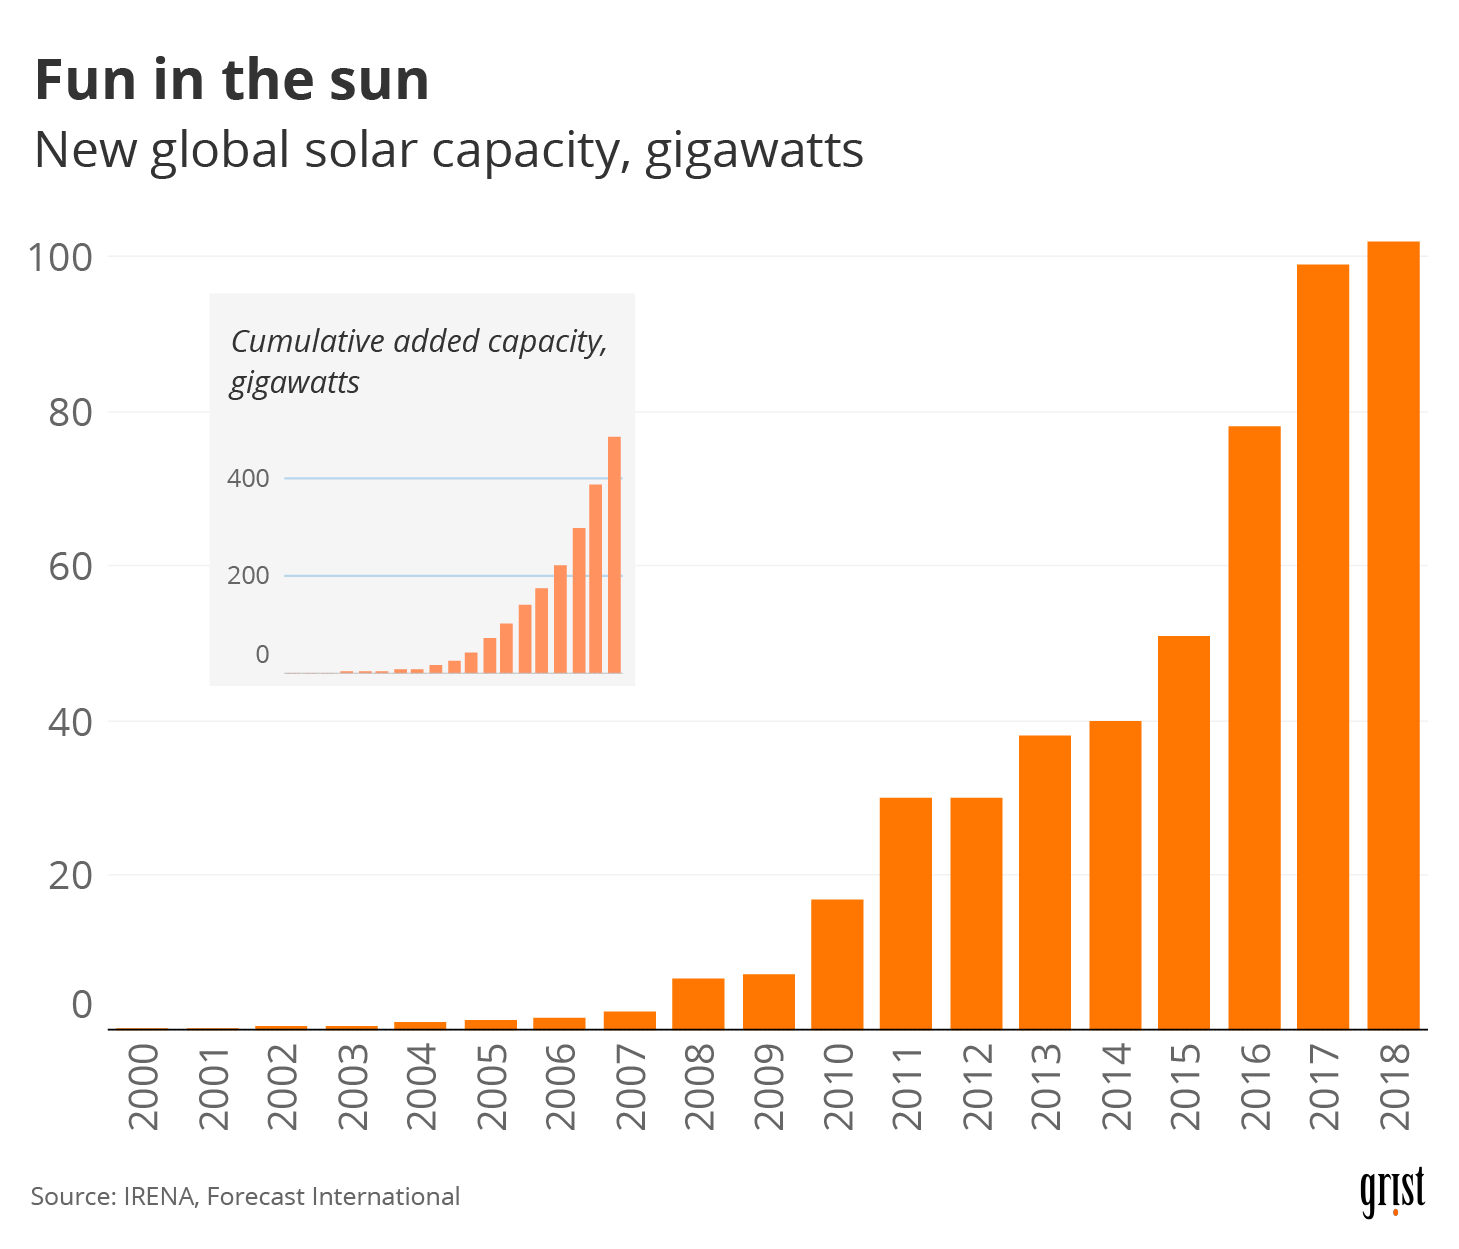 A chart showing the new global solar capacity, gigawatts